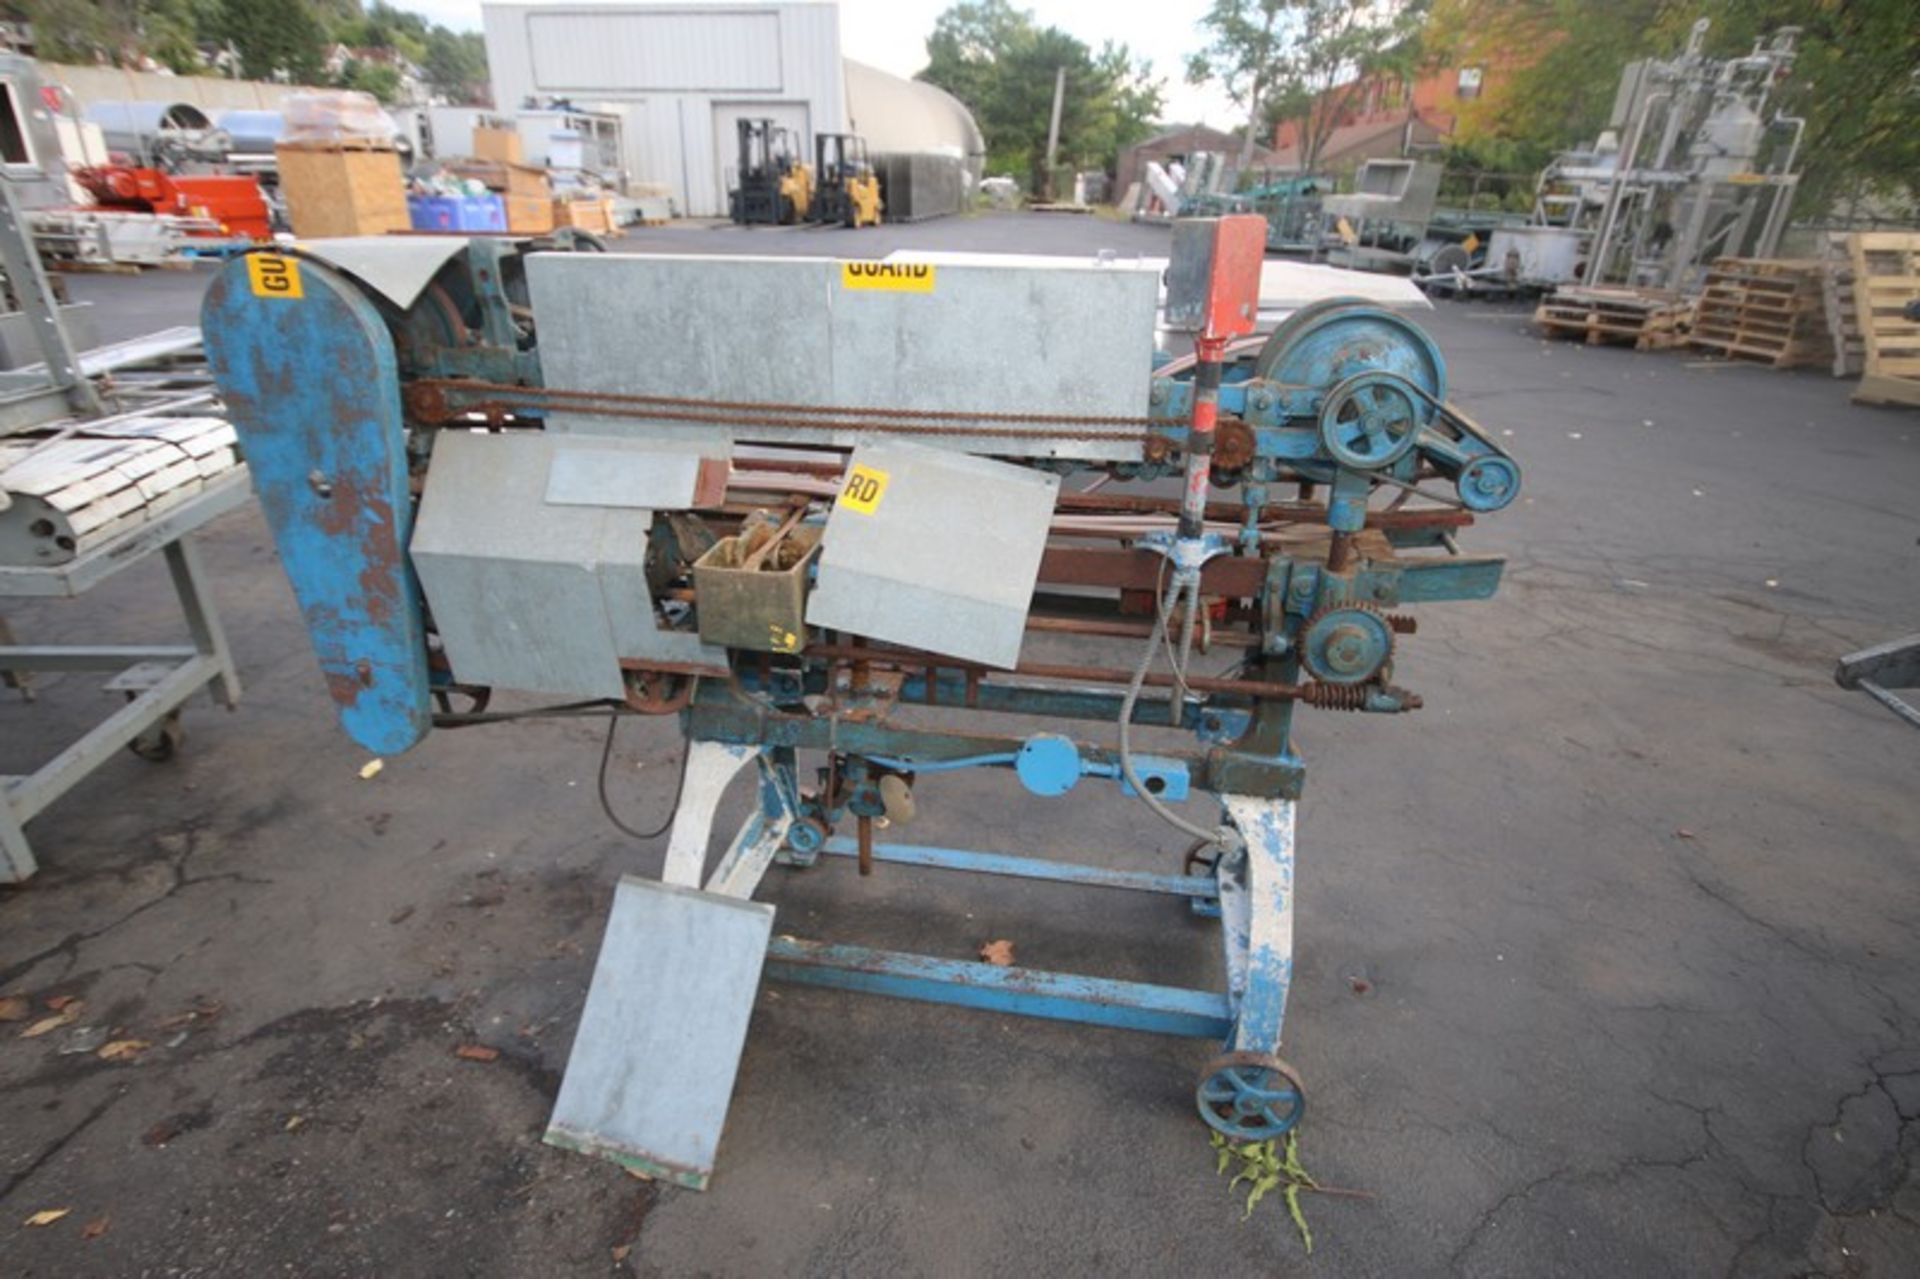 Burt Roll Through Labeling Machine, S/N 13465 - Possibly Missing Parts (INV#73223) (LOCATED AT MDG - Bild 5 aus 5